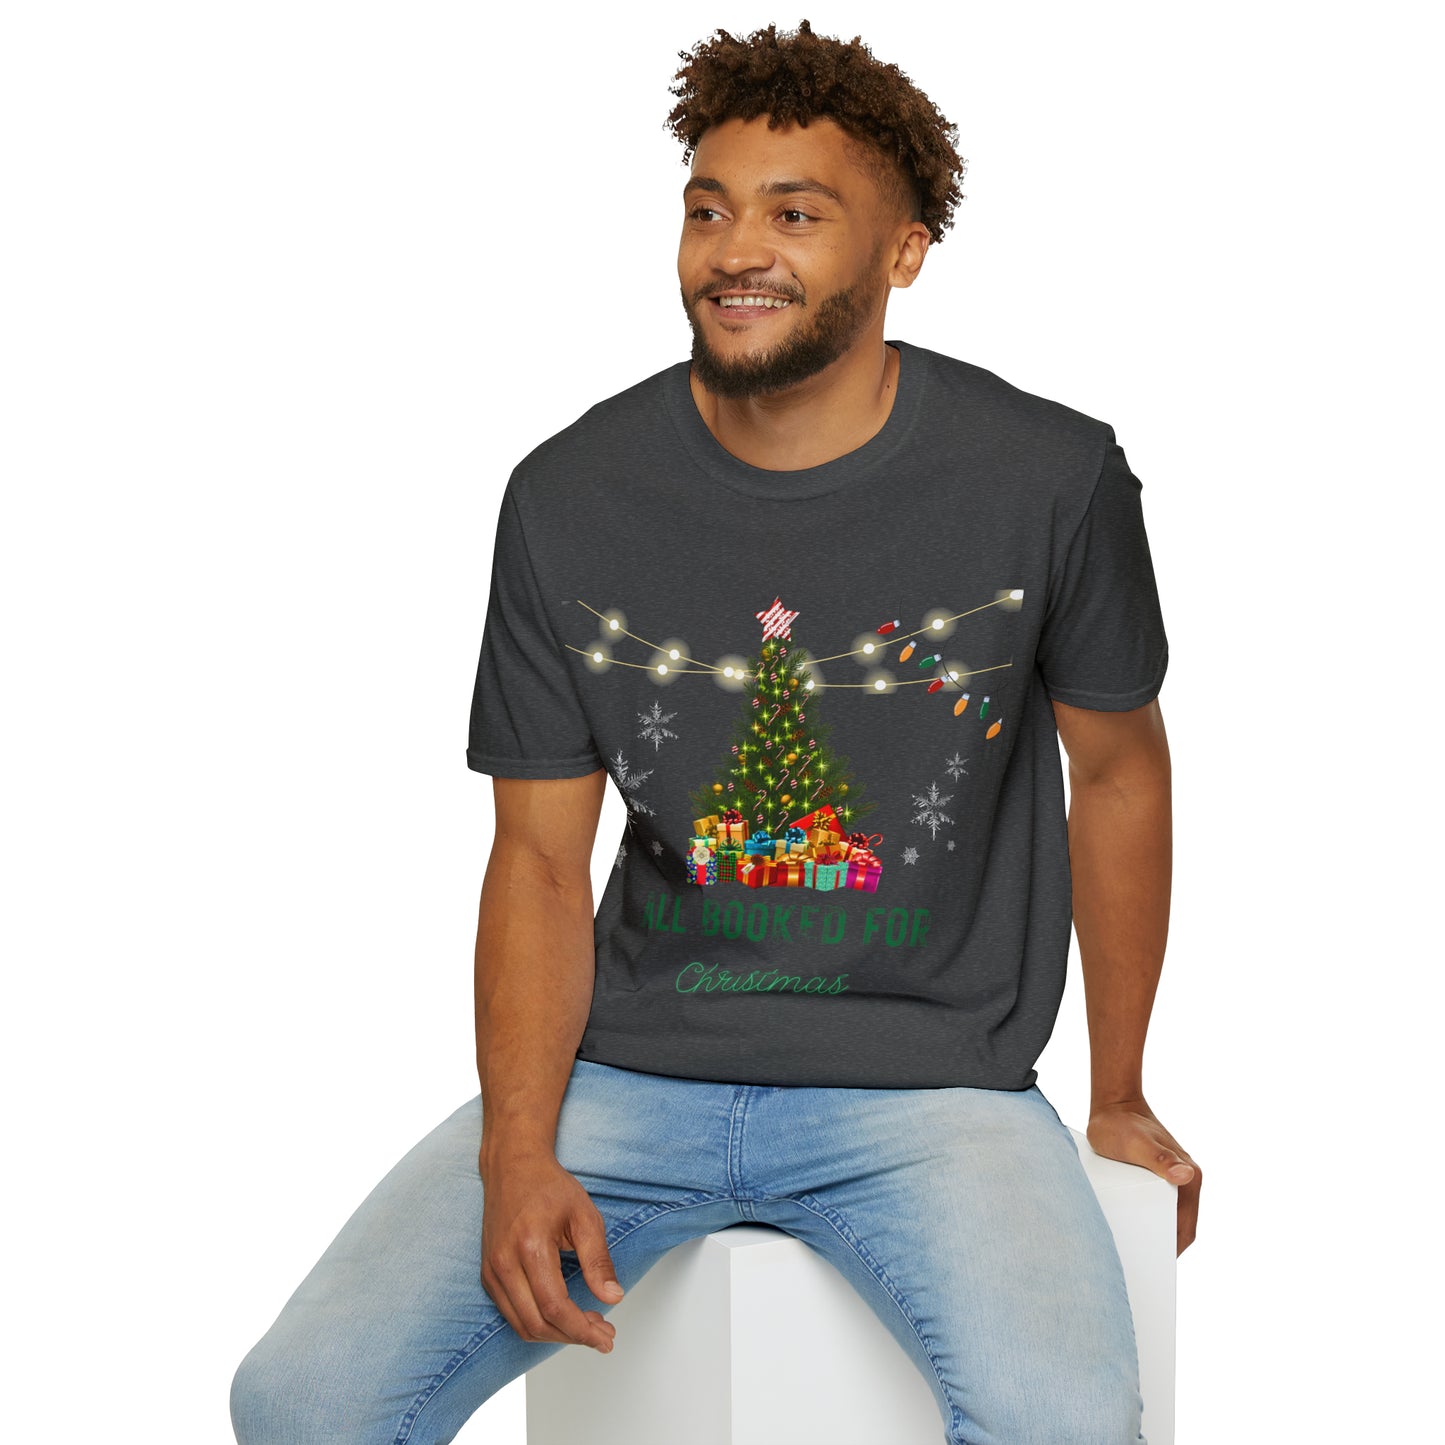 All booked for Christmas - Unisex Softstyle T-Shirt